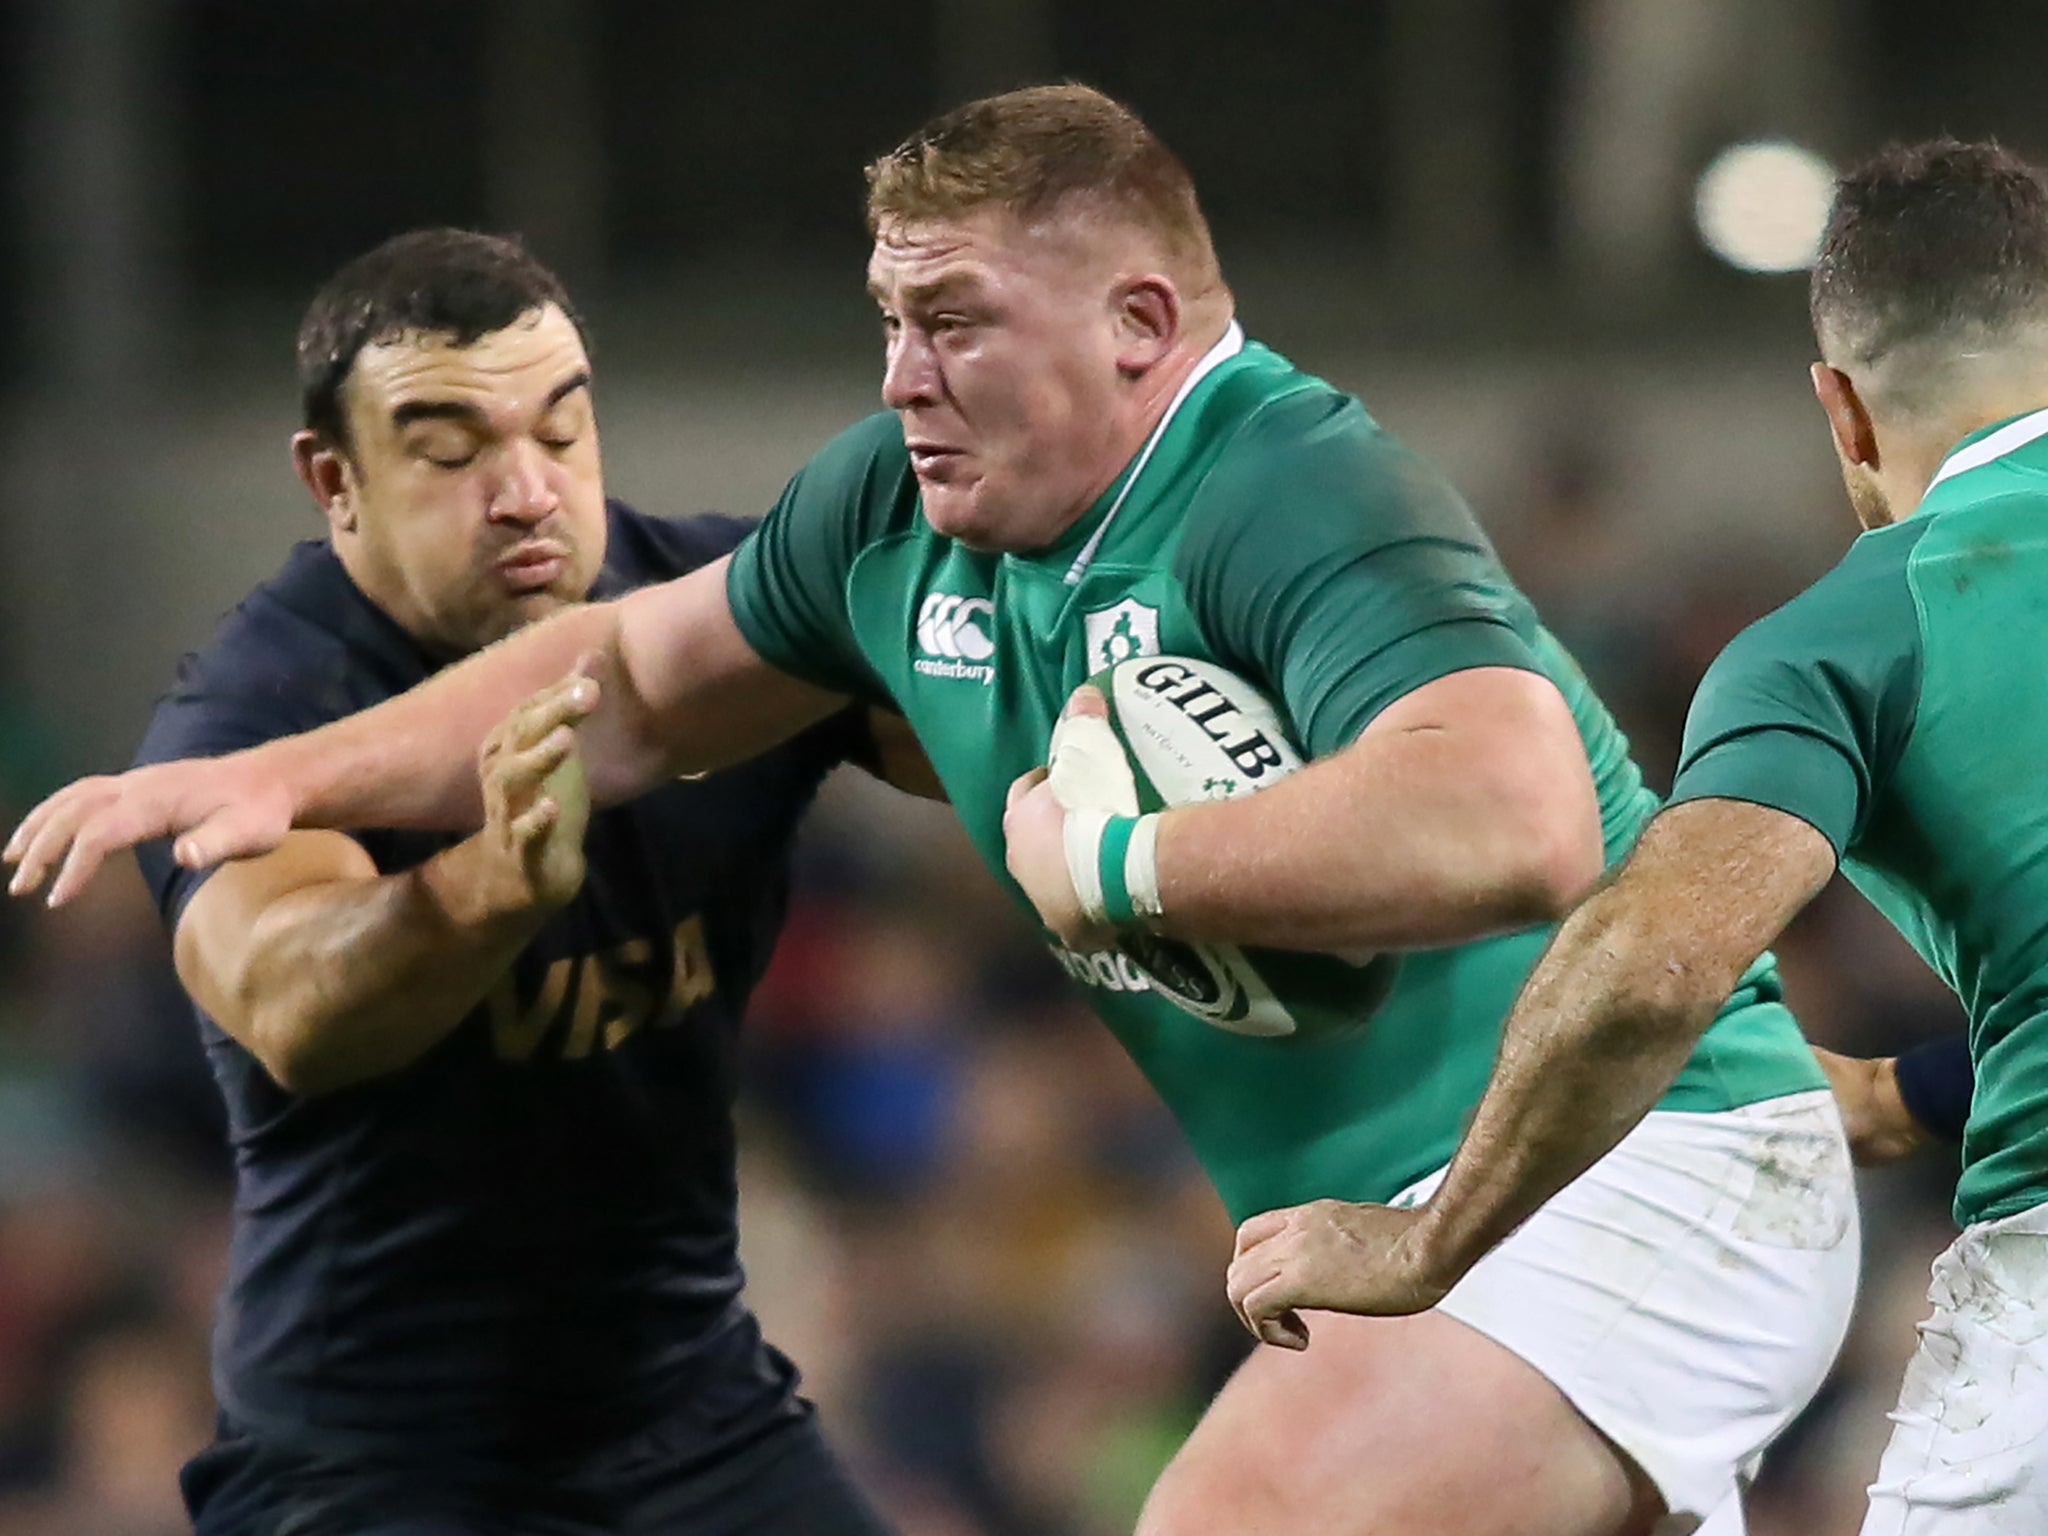 Tadhg Furlong will miss Ireland's clash with Wales with a hamstring injury